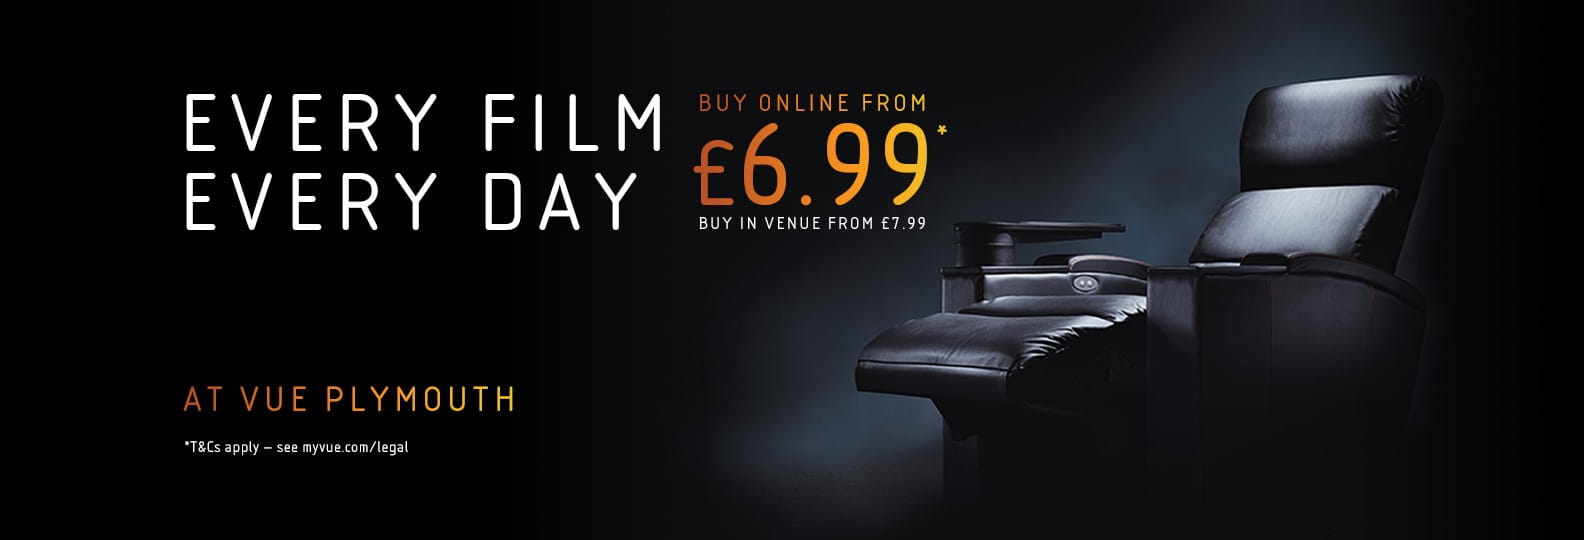 Every Day, Every Film from £6.99 at Vue Plymouth